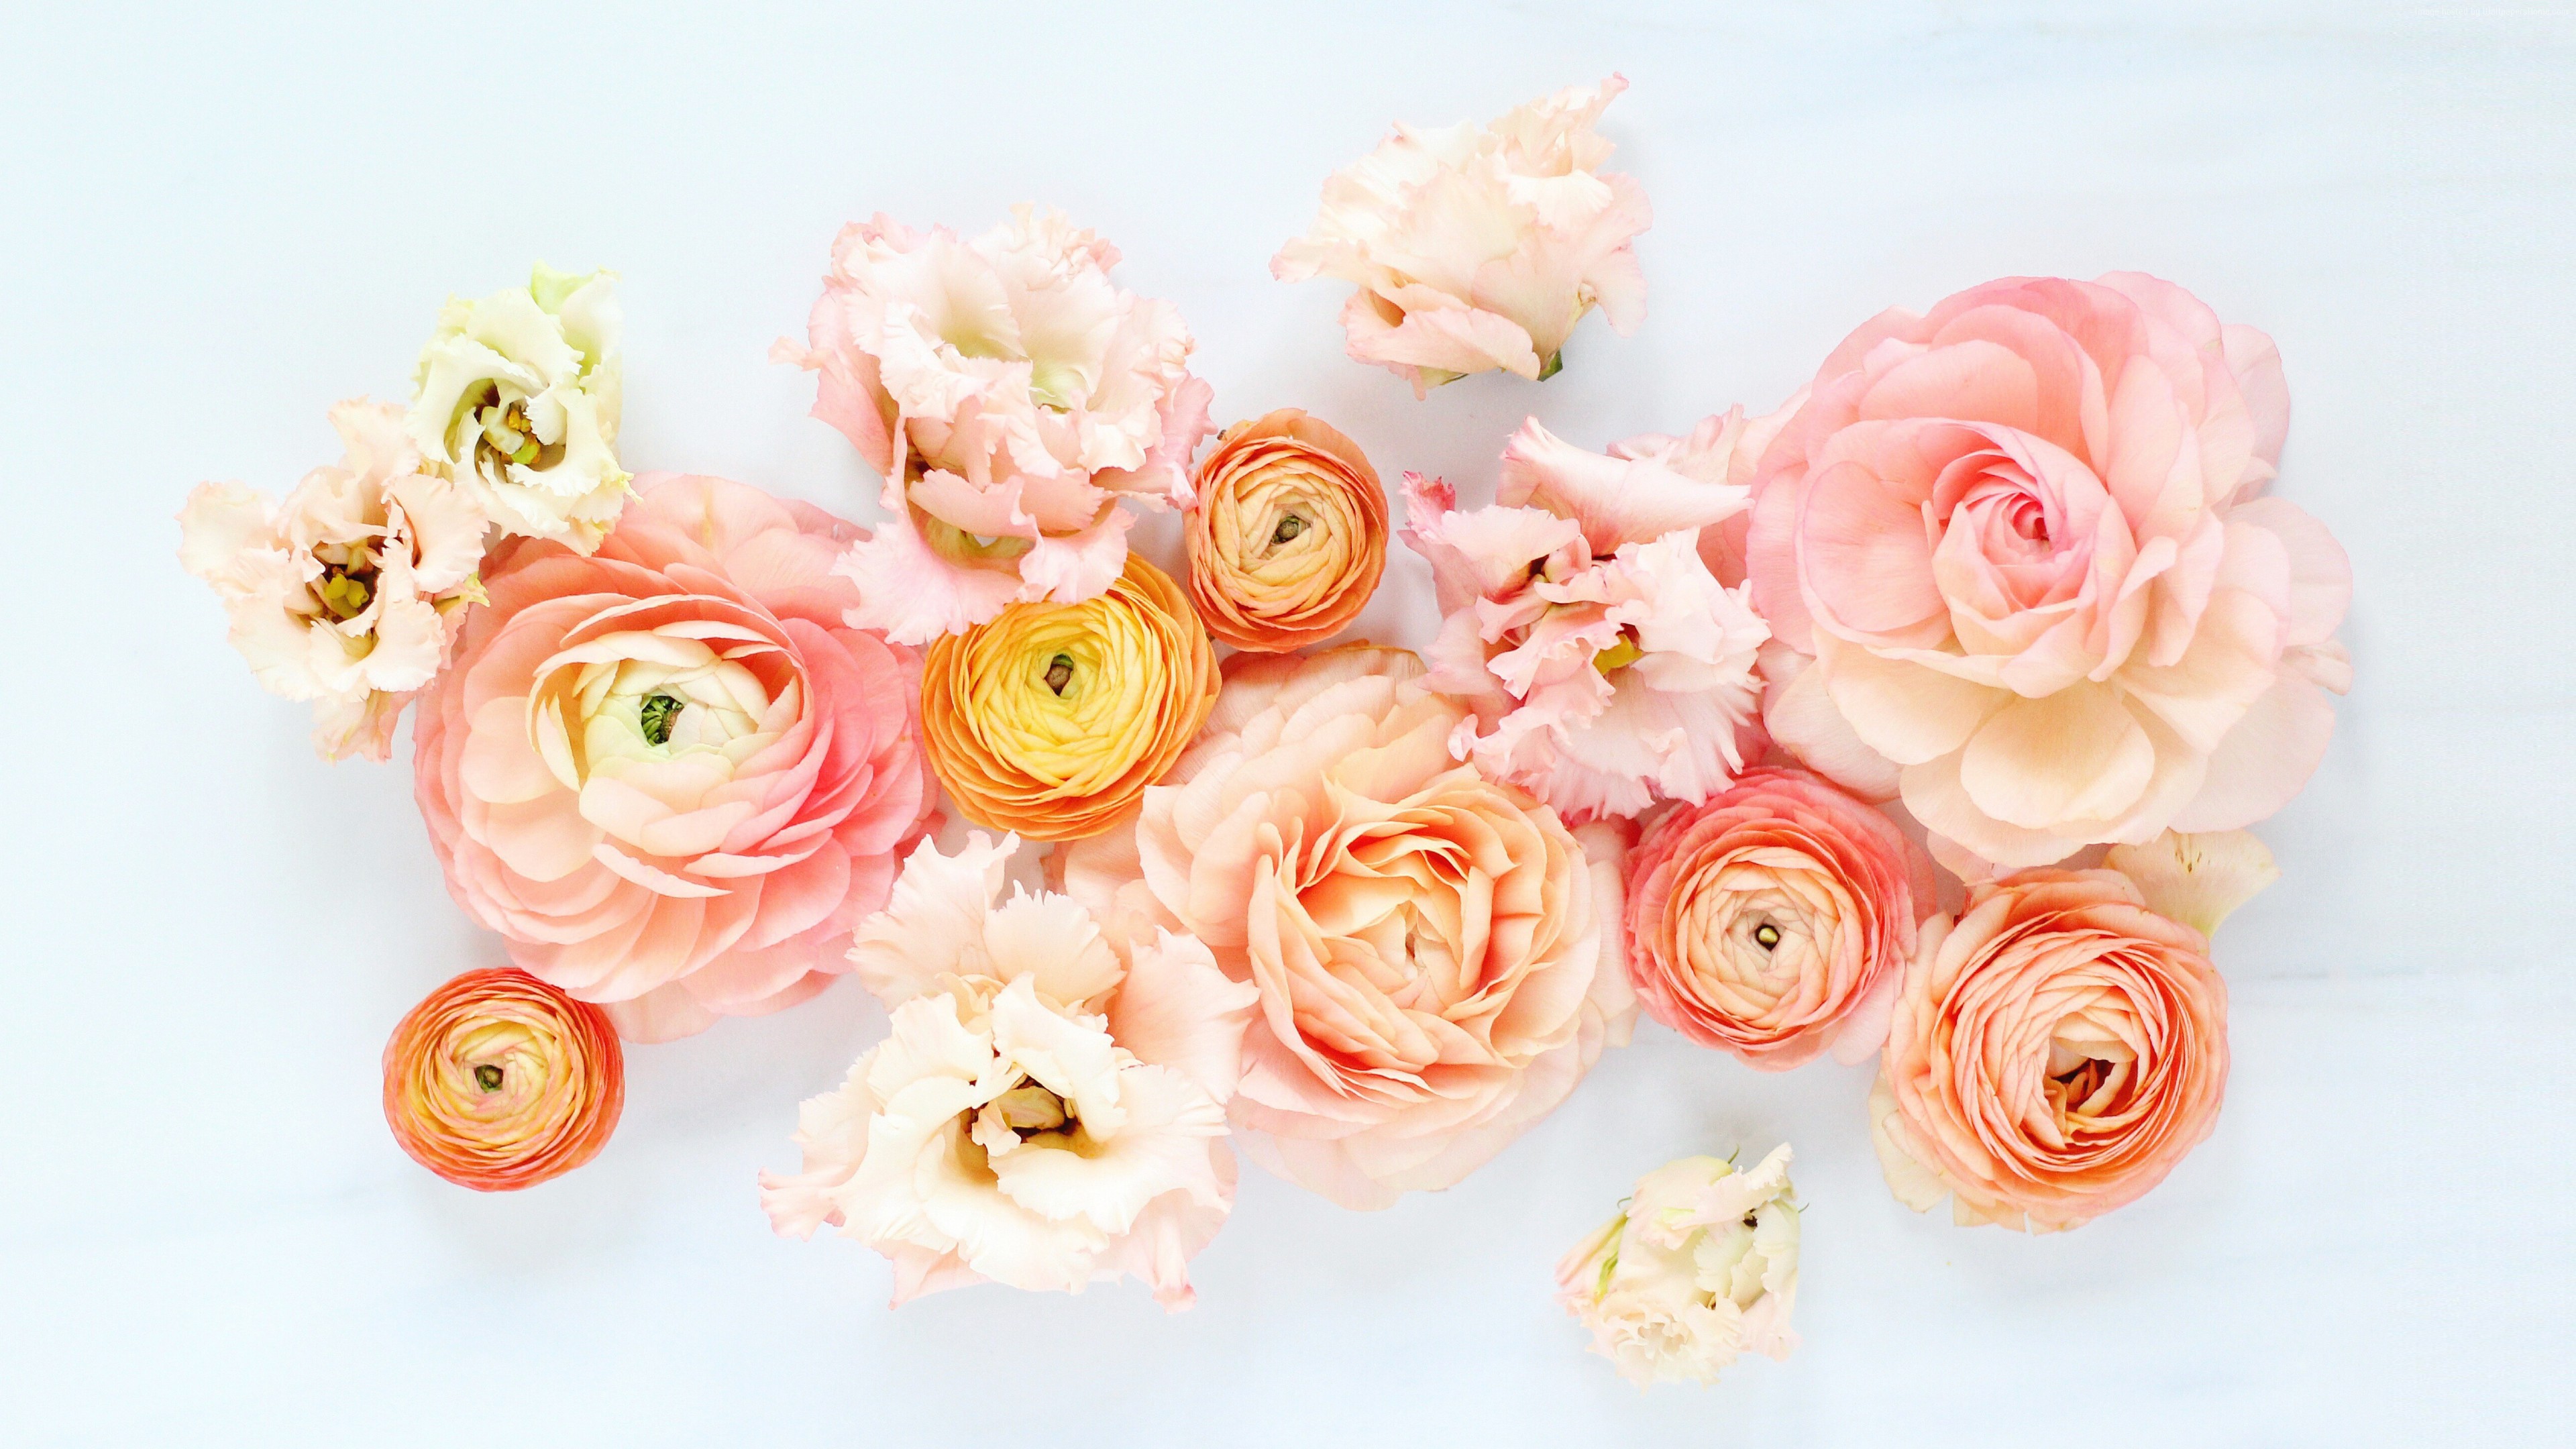 Stock Images flowers, 5k, Stock Images